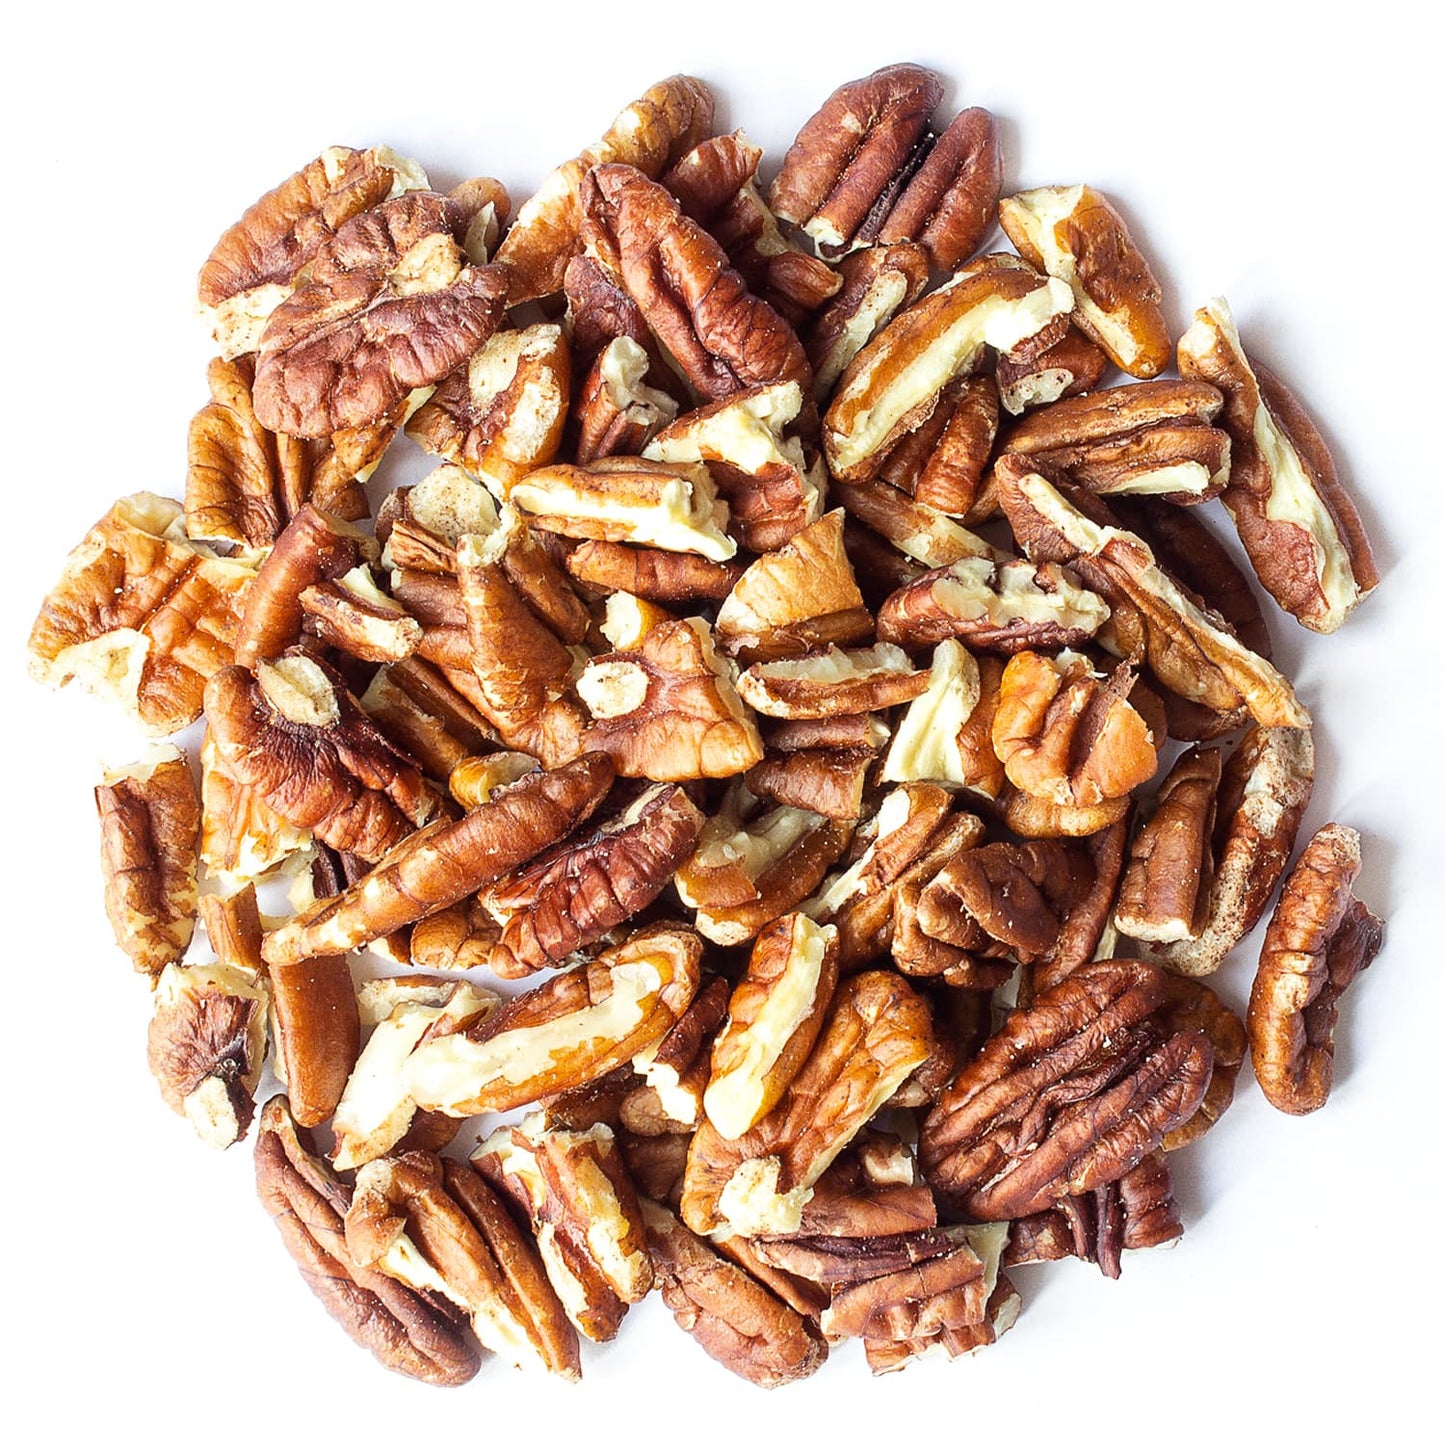 Organic Raw Pecan Pieces - Fresh Nuts, Non-GMO, Kosher, Unsalted, Bulk, Best for Baking, Sirtfood, Product of the USA - by Food to Live